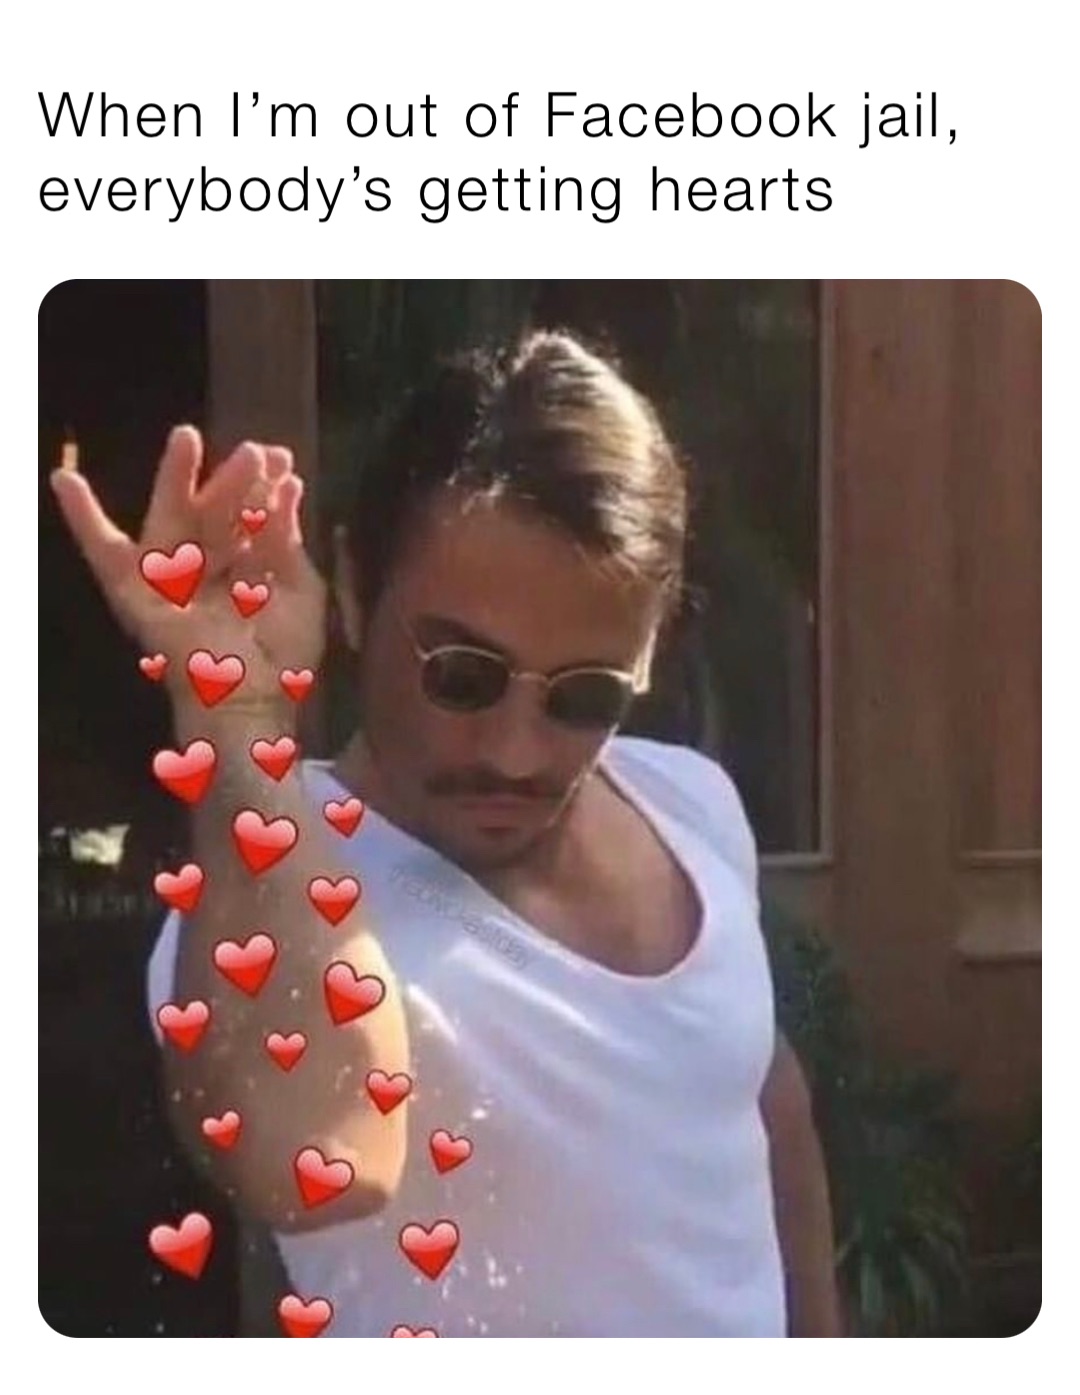 When I’m out of Facebook jail, everybody’s getting hearts